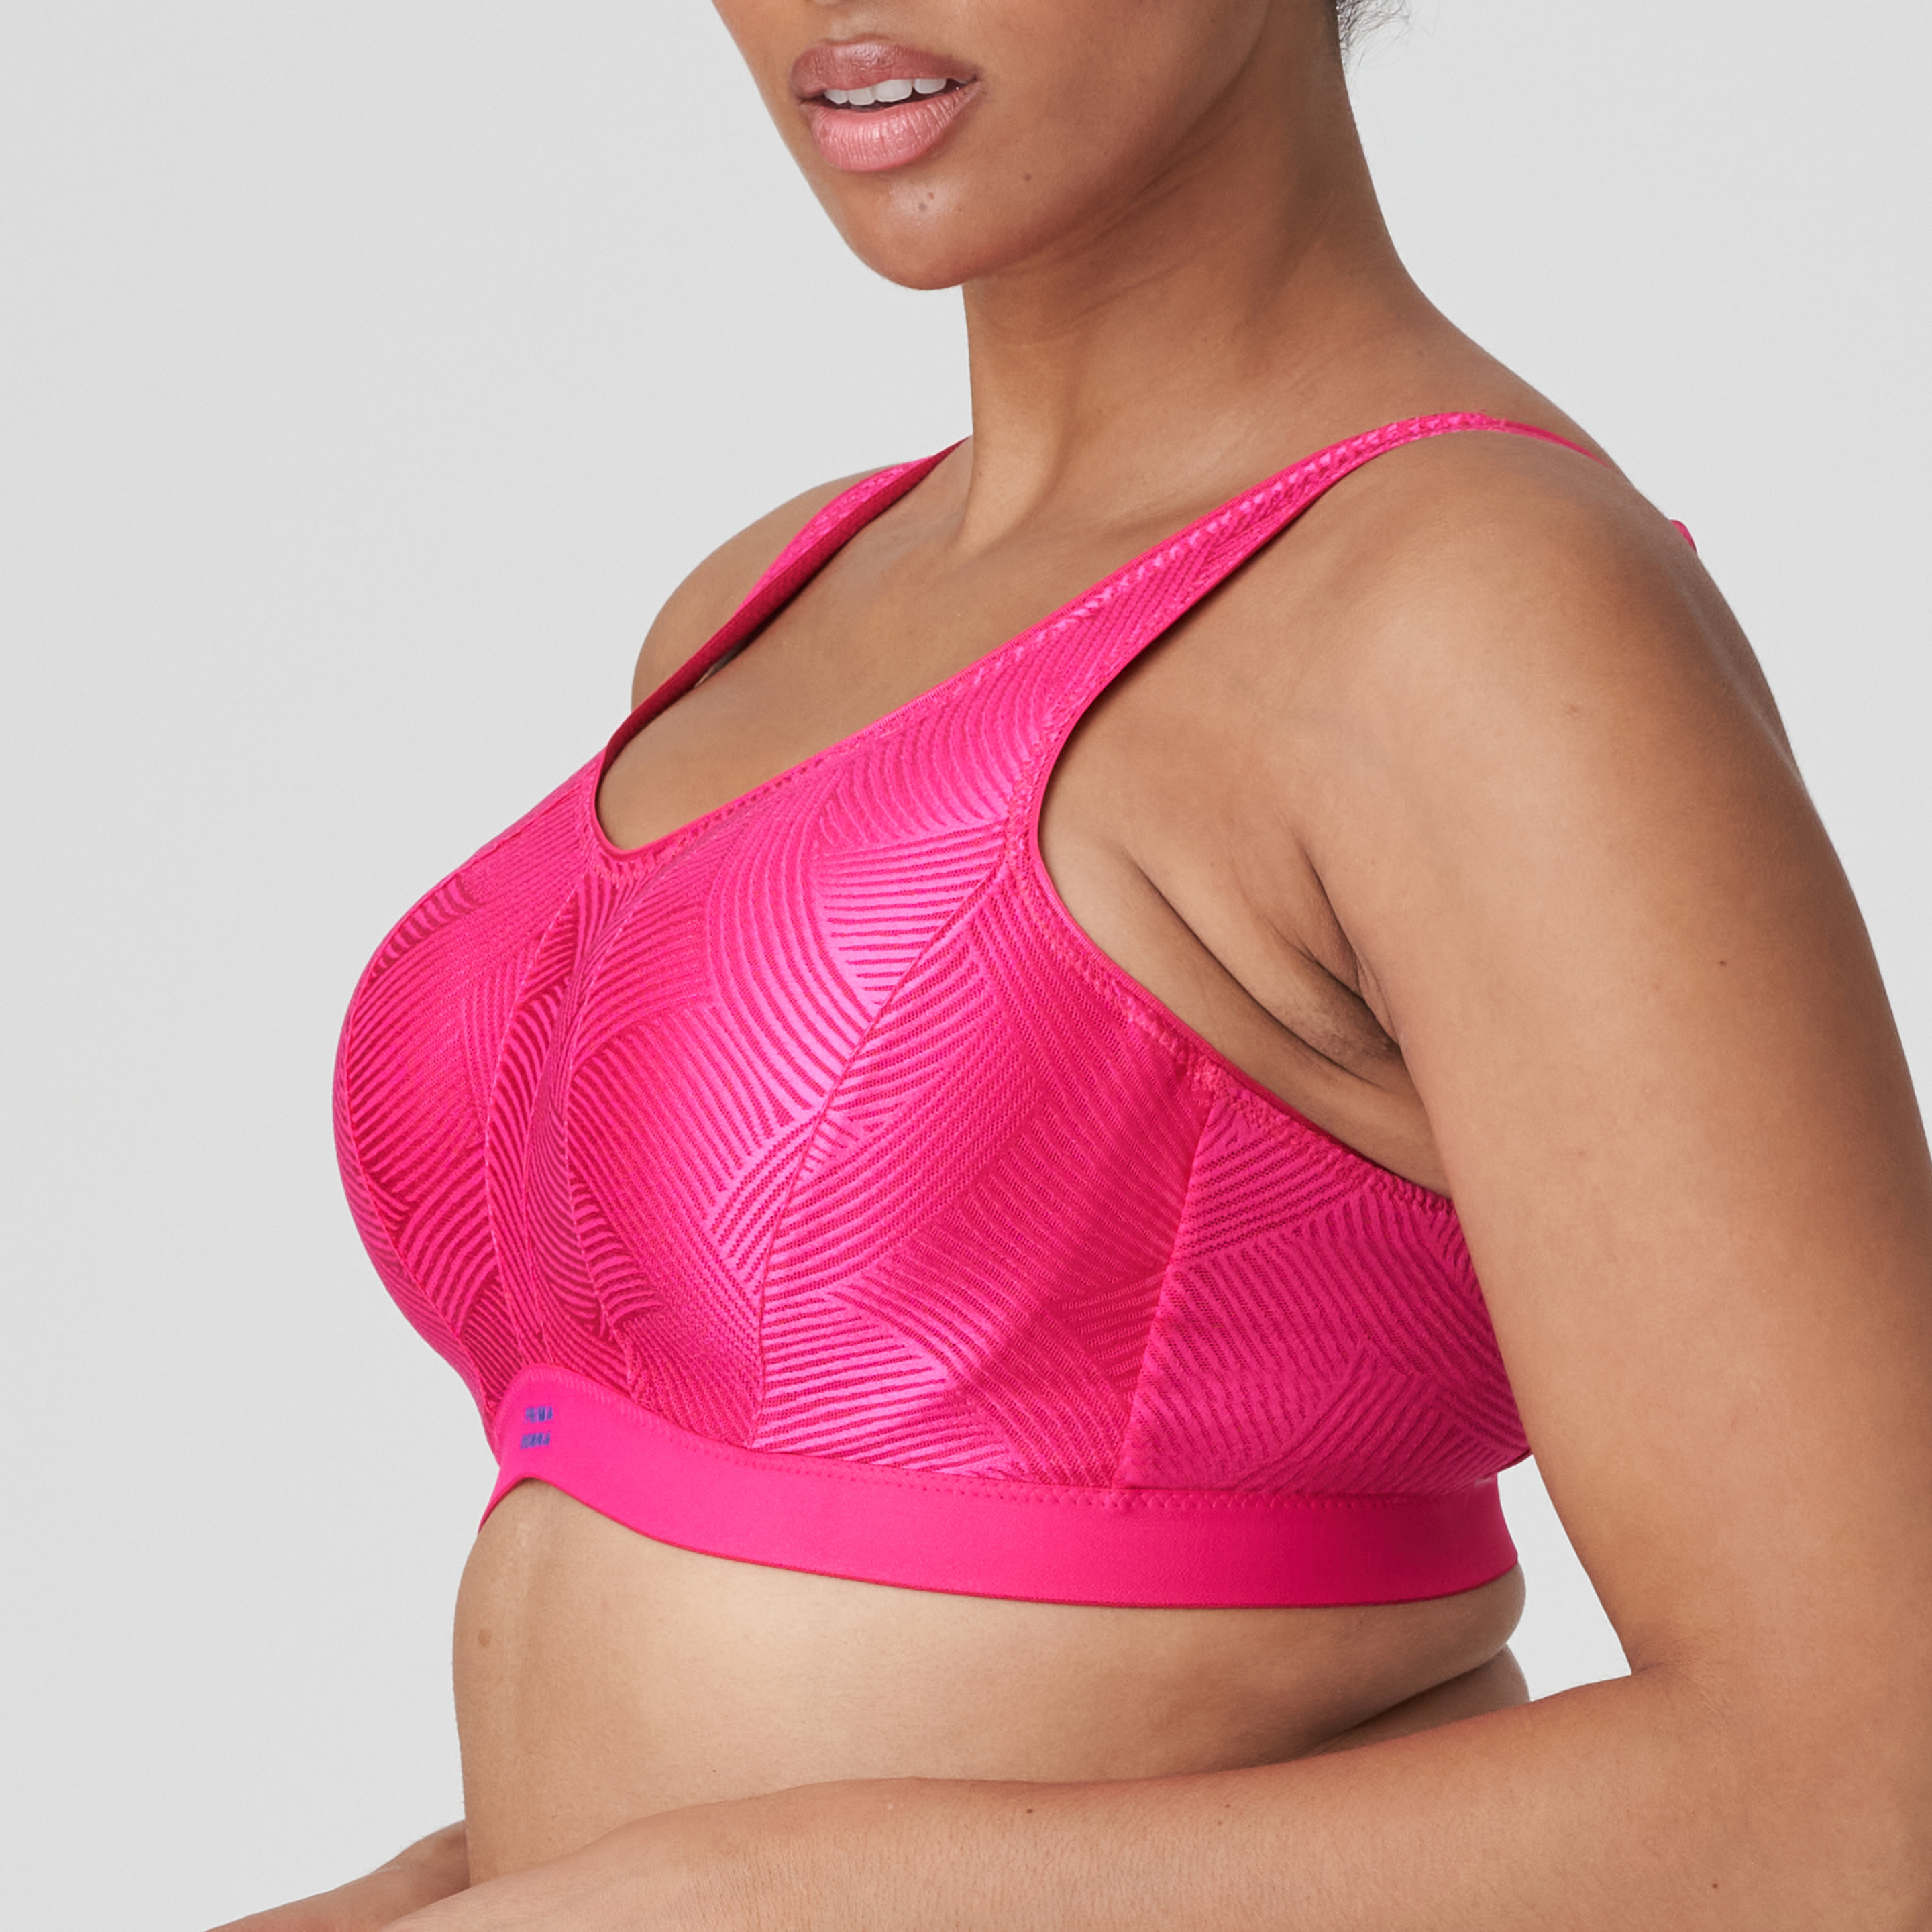 PrimaDonna Sport THE GAME Electric Pink padded sports bra